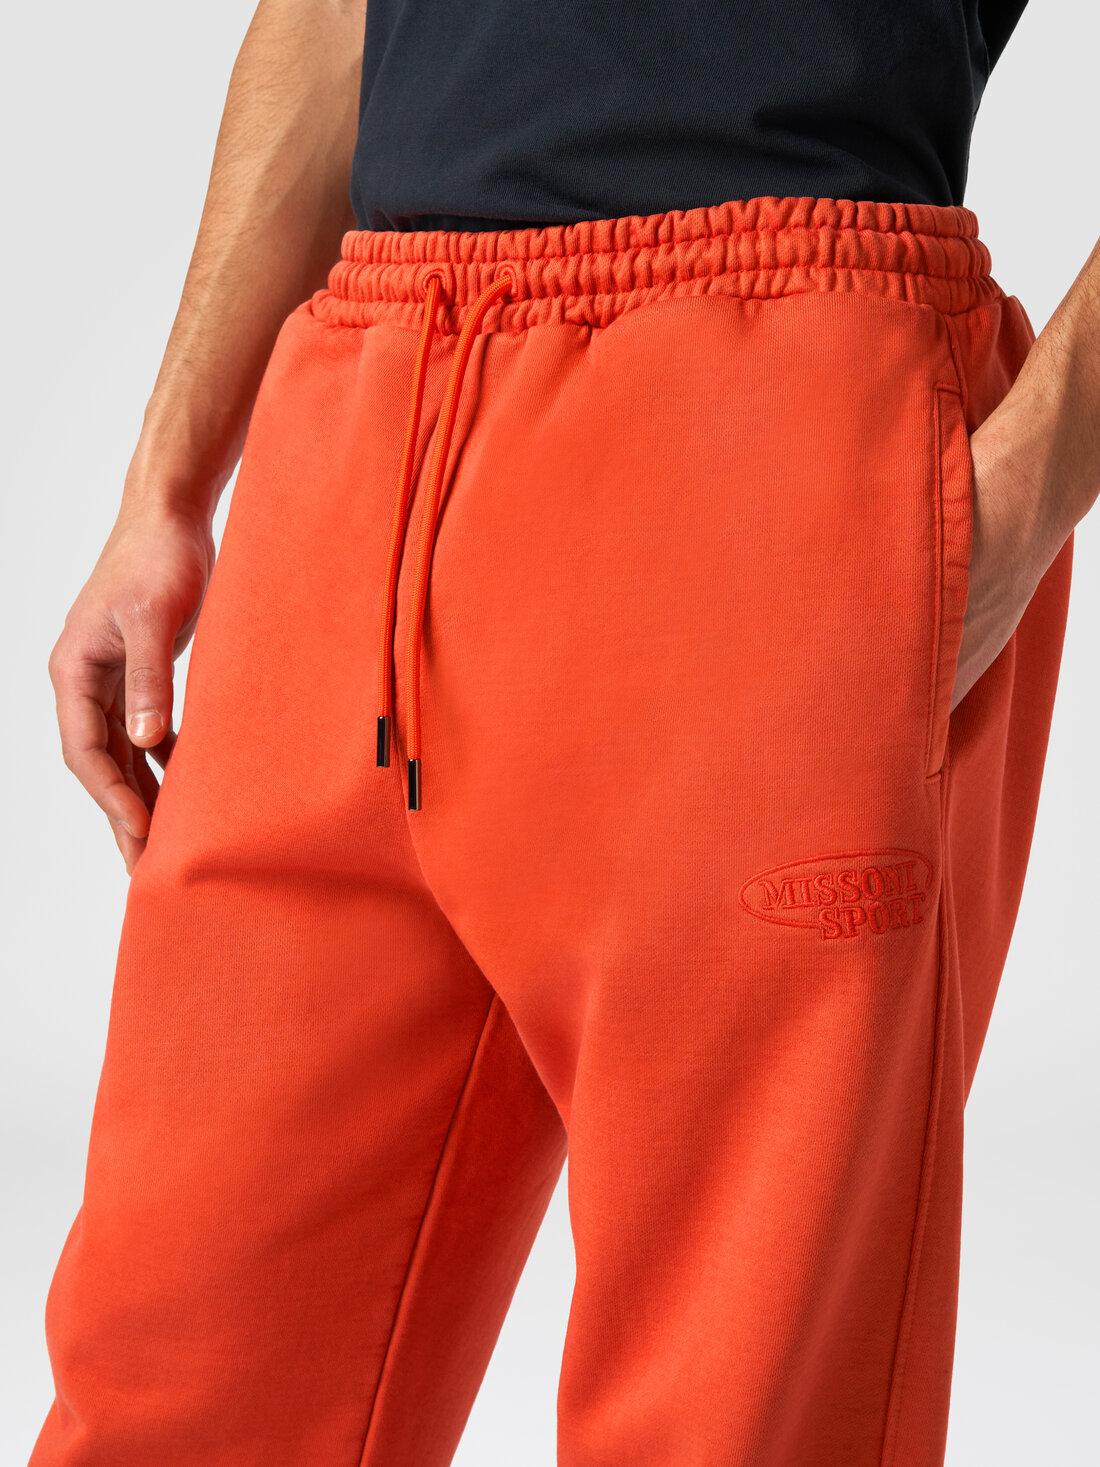 Trousers in cotton fleece with logo, Orange - TS24SI00BJ00H0S207S - 4